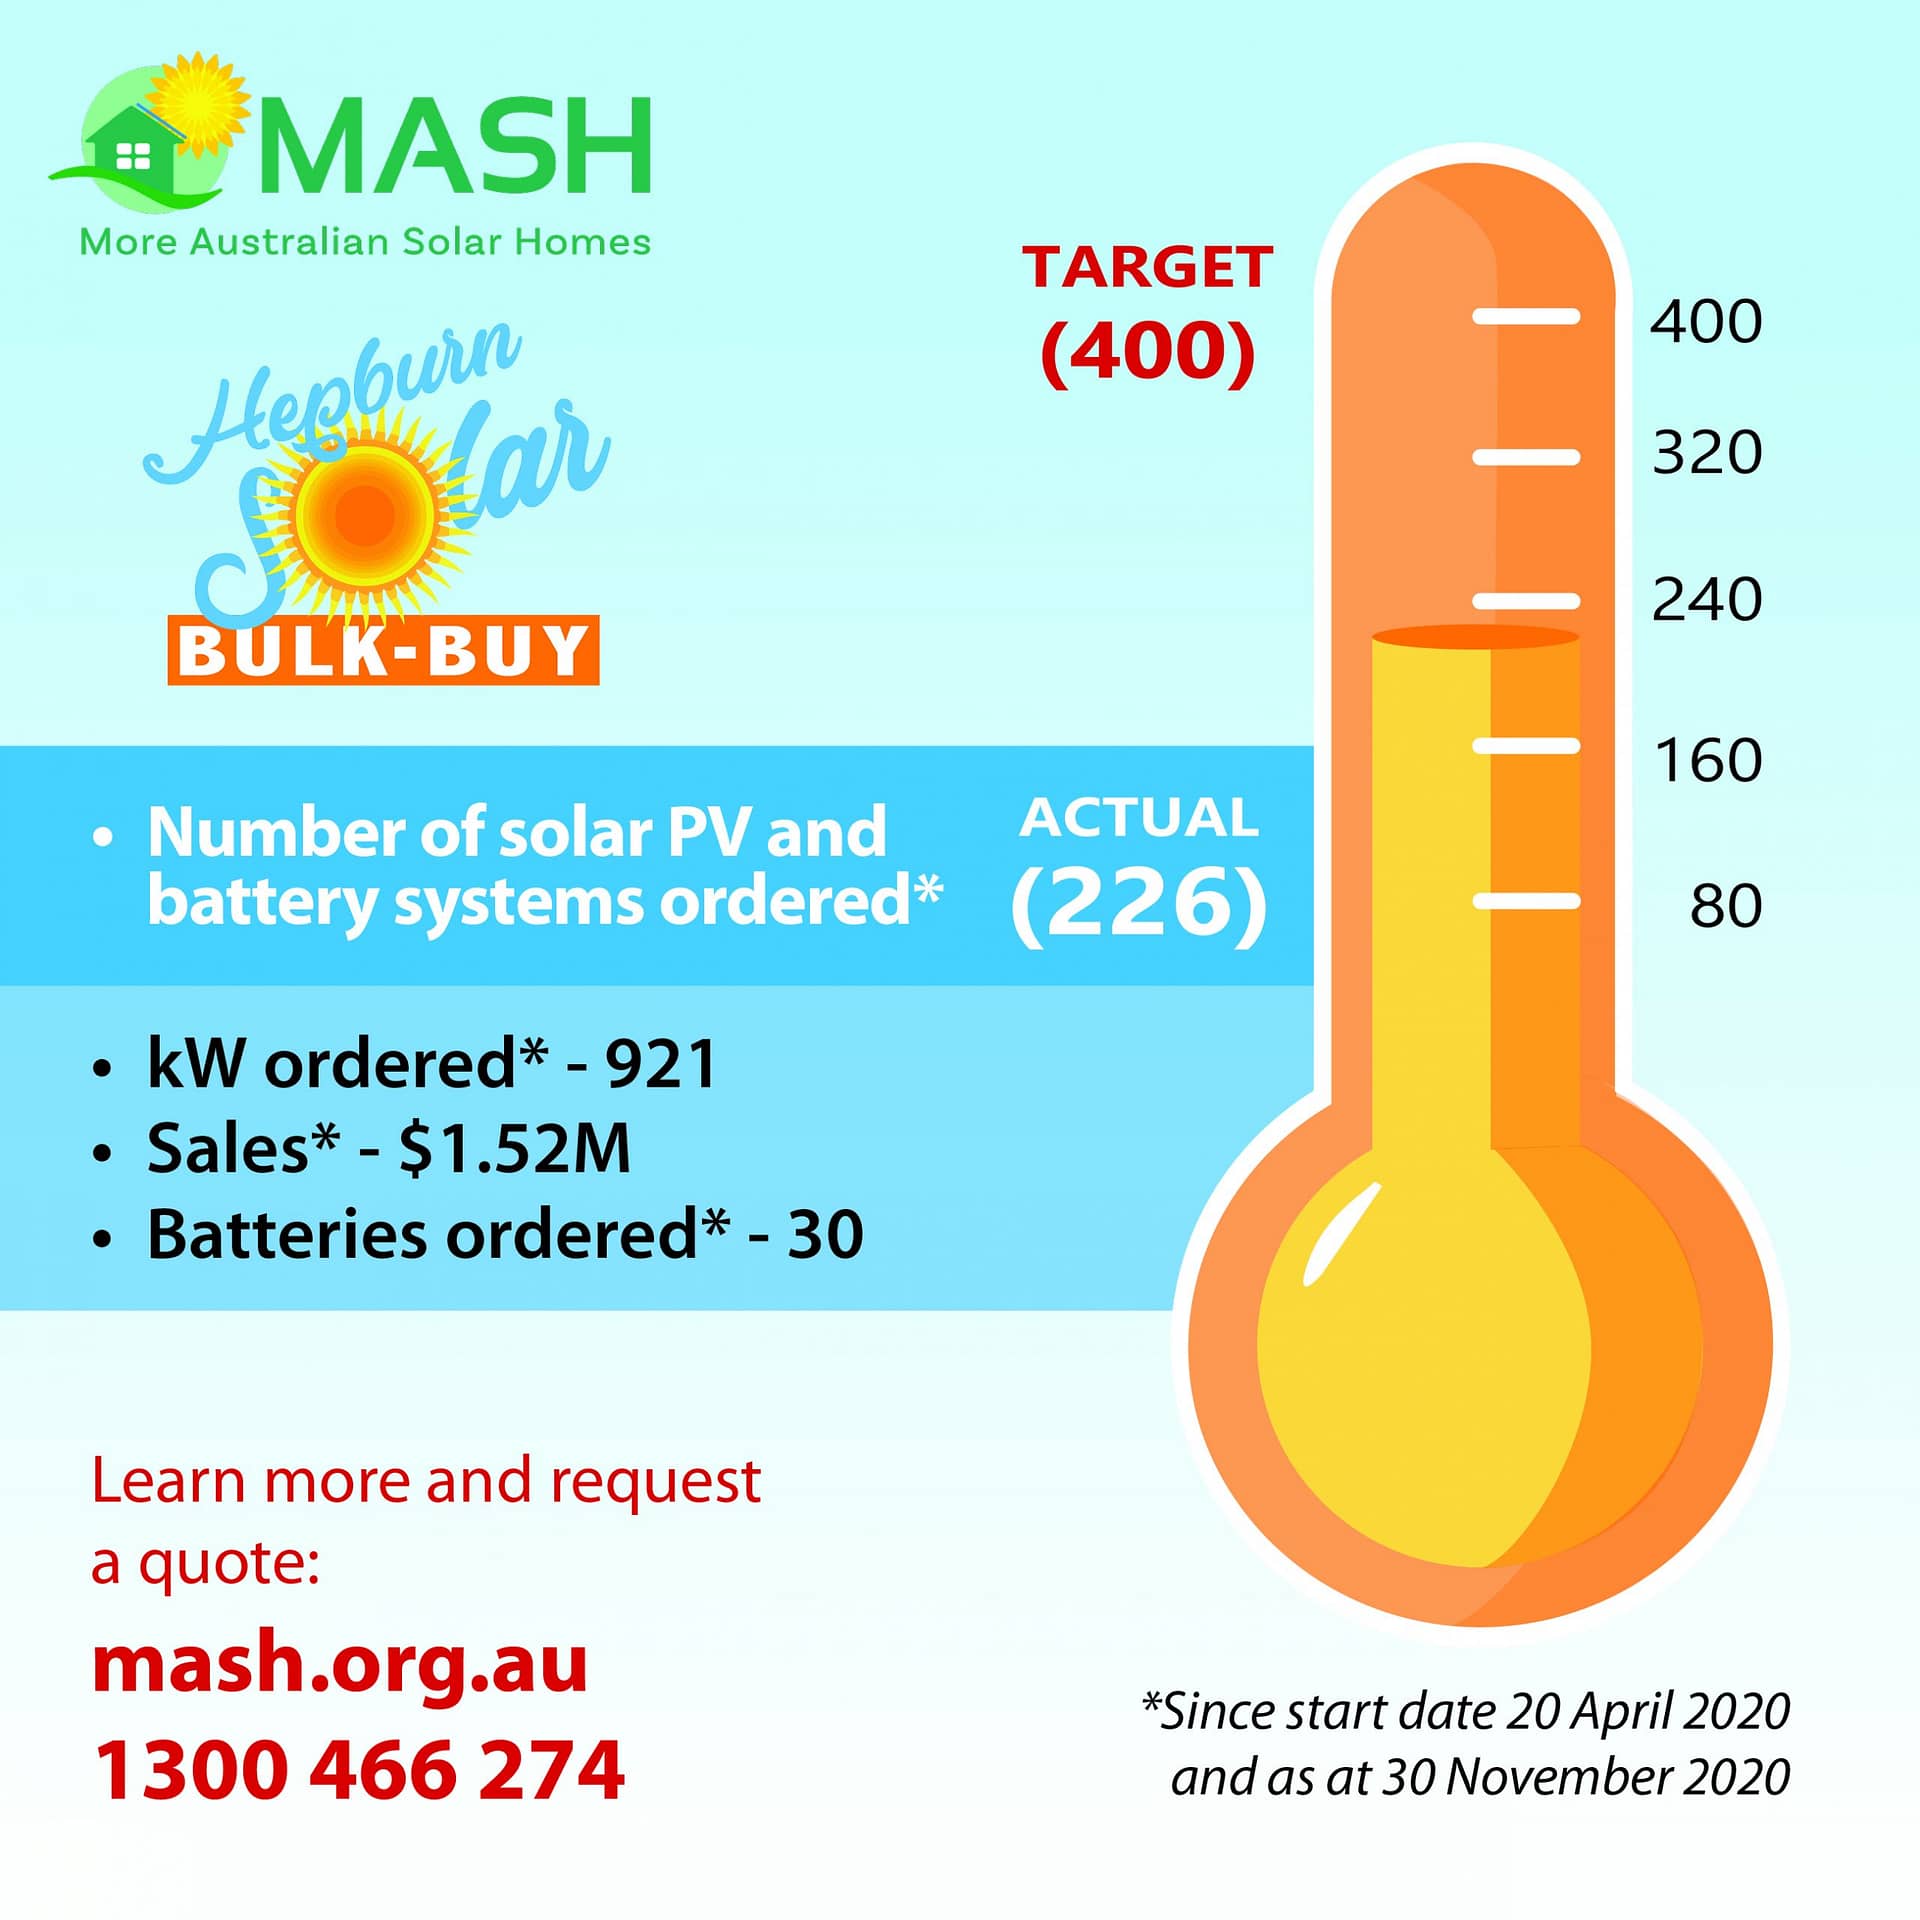 226-solar-battery-systems-ordered-since-april-2020-mash-community